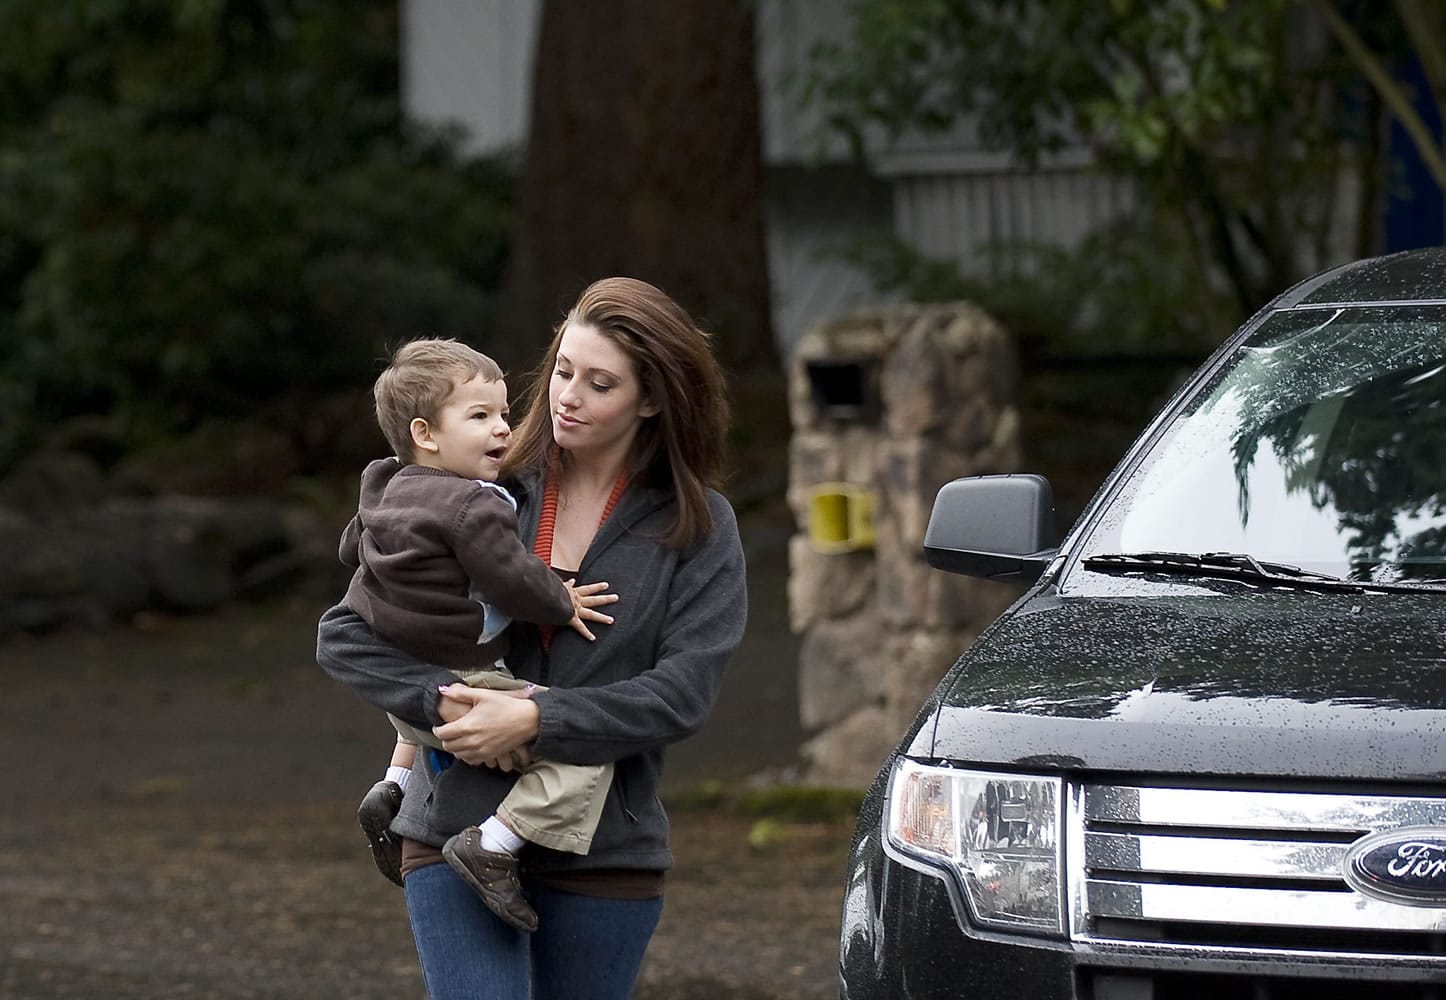 Sarah Remington drops off her son Jacob, 2, at Wendy's Teddy Bear Day Care in Vancouver in a Columbian file photo from October. Remington, a single mom, received a $3,000 bill in the mail from the state saying it paid her for child care subsidies for which she was ineligible. The state approved Remington in error, and now, she's responsible for the bill, which she can't afford.